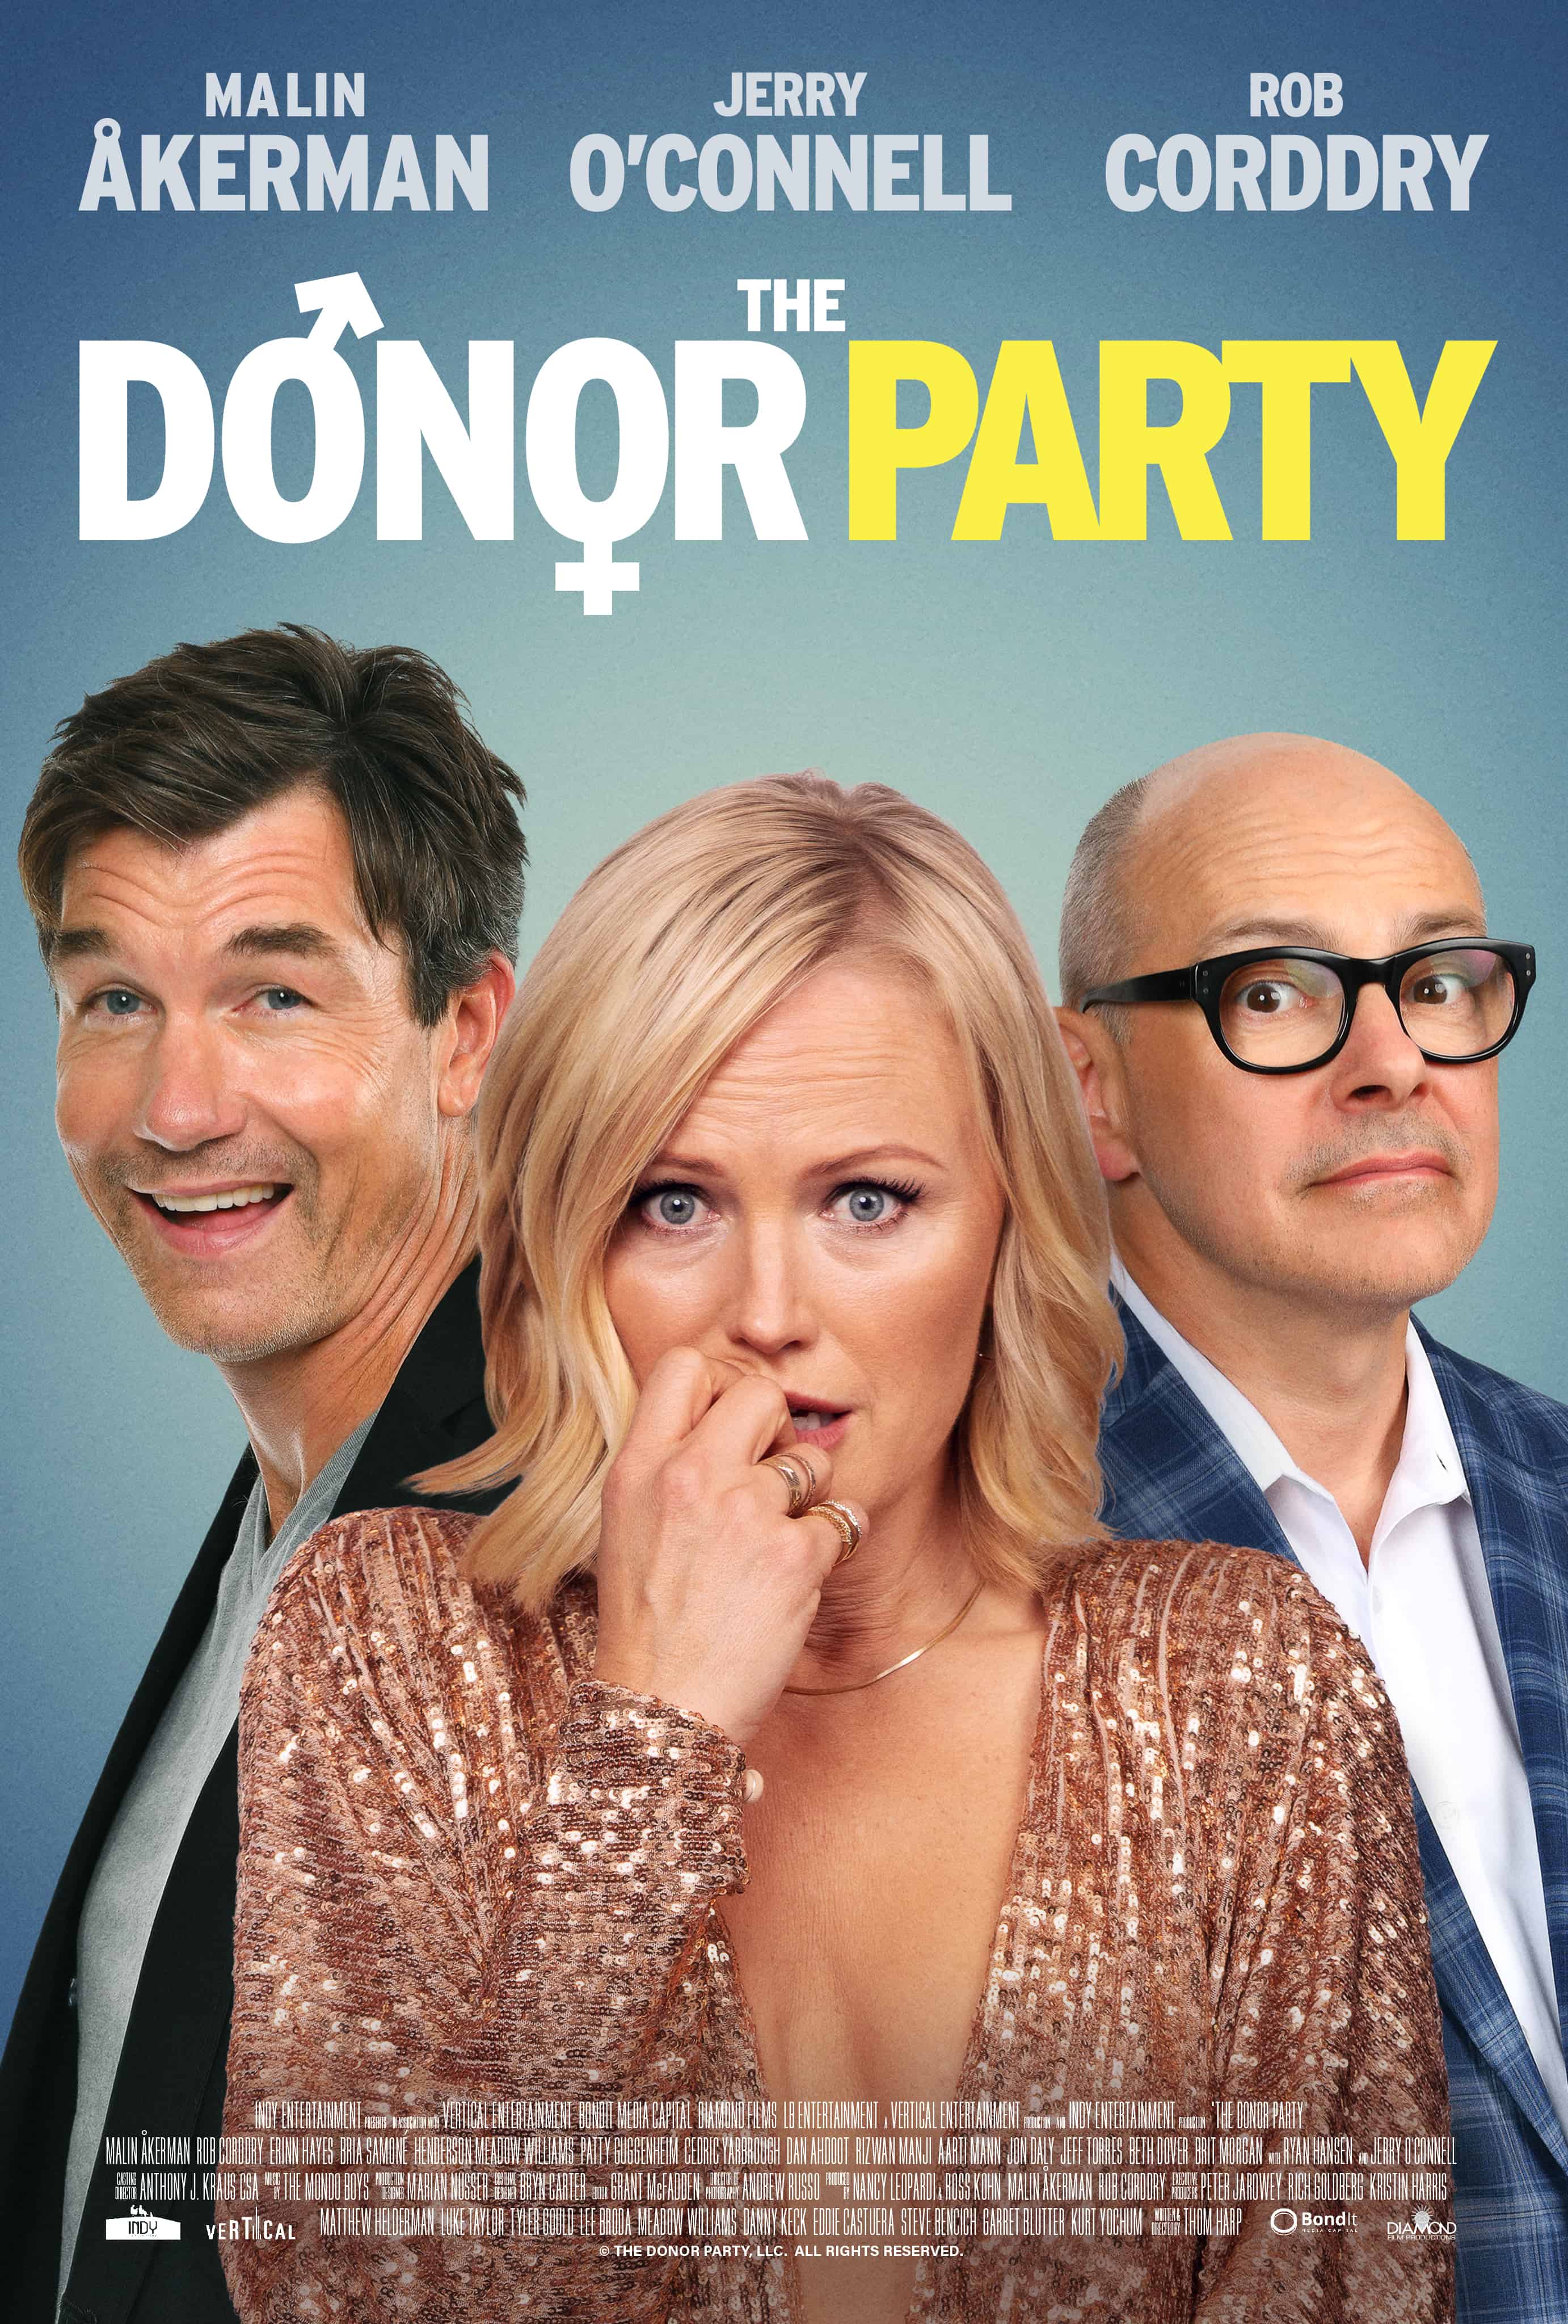 The Donor Party has a new clip! 9